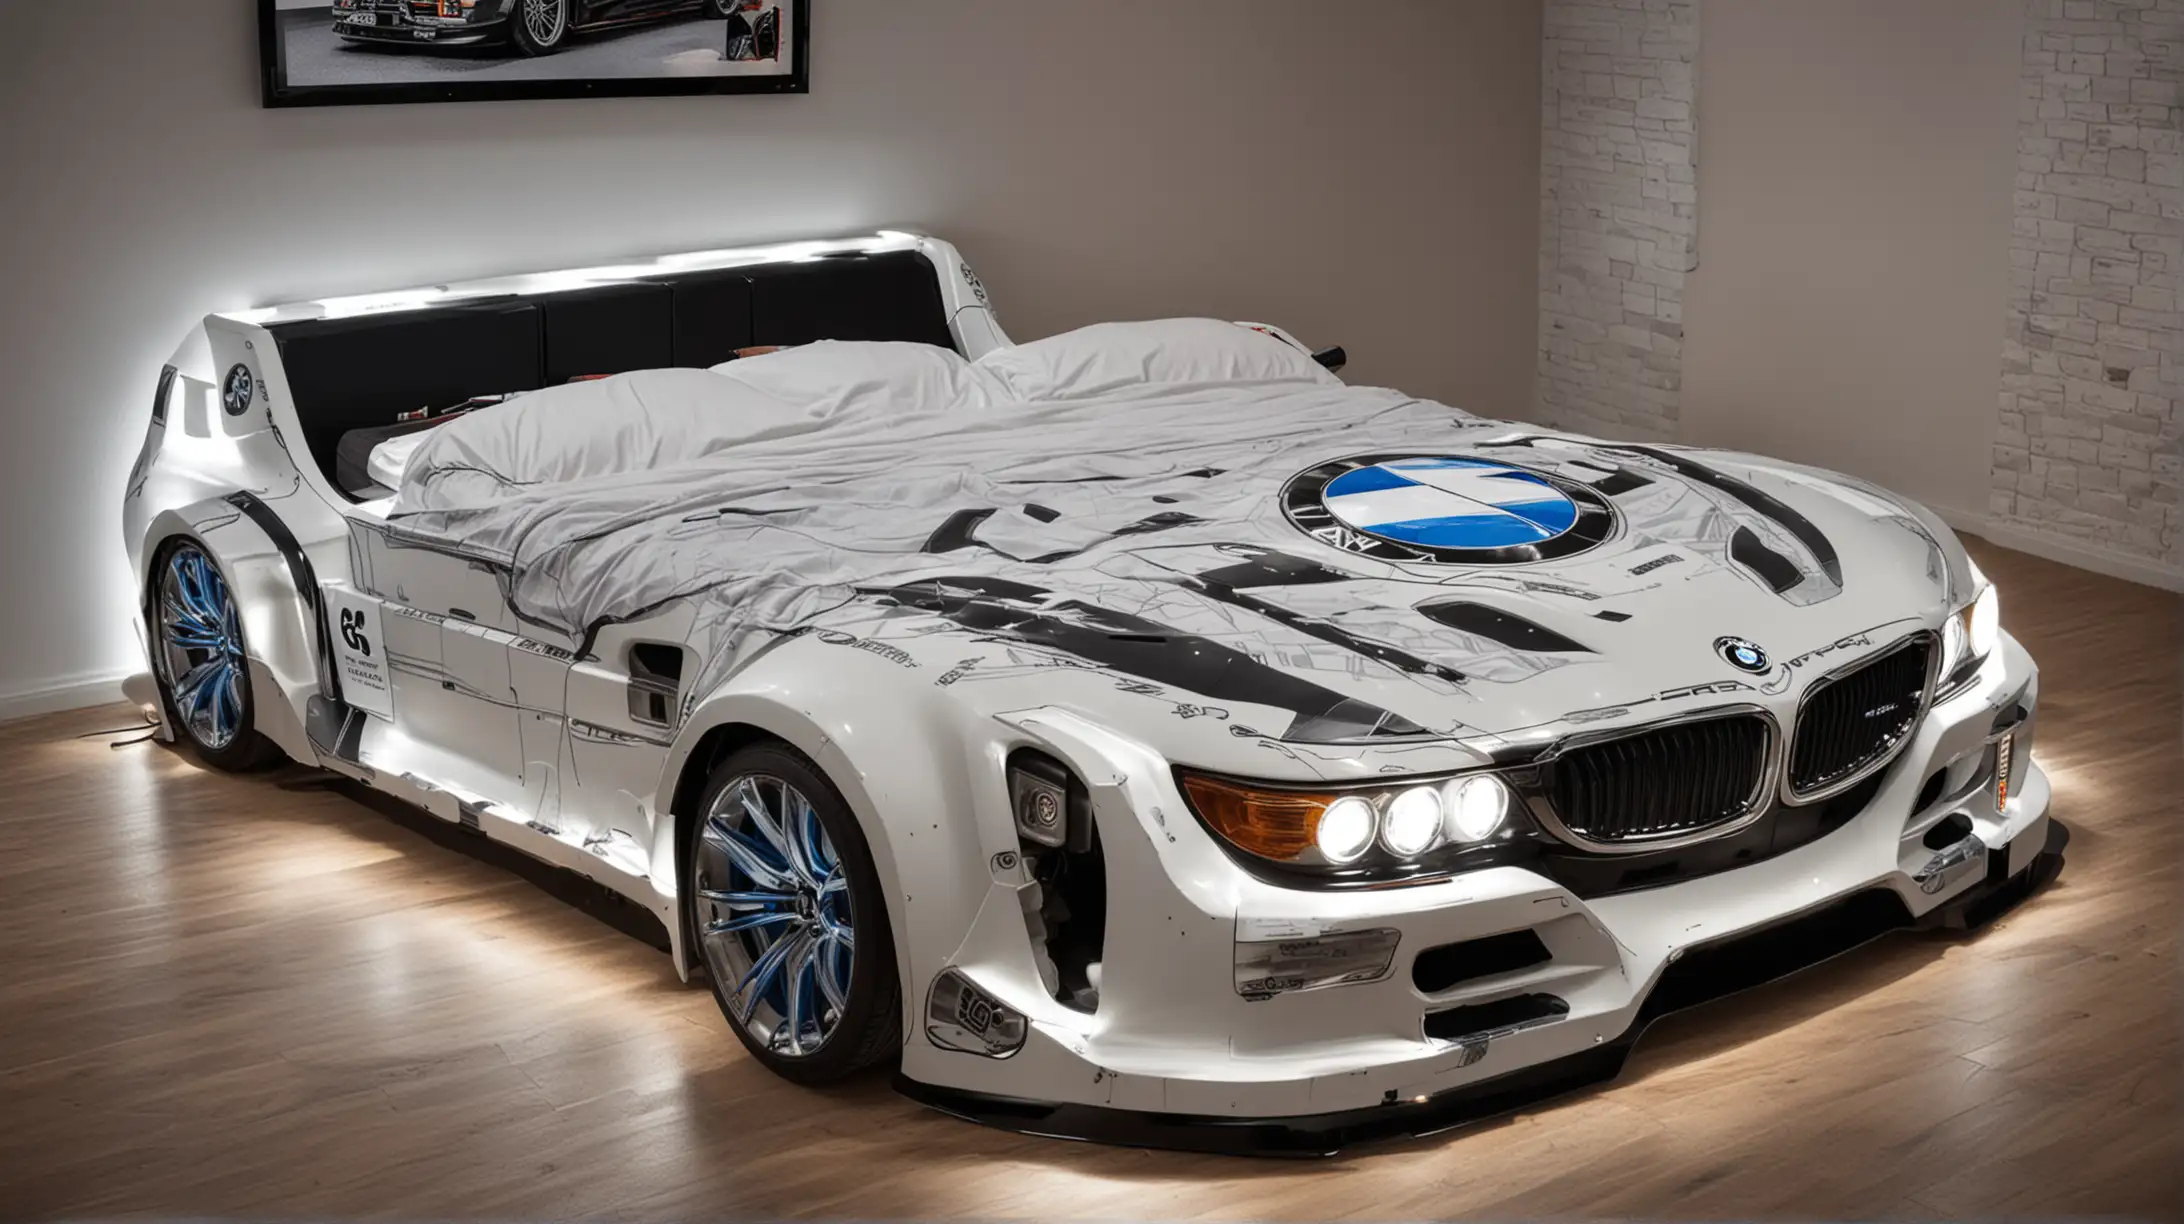 Double bed in the shape of a BMW car with headlights and graphics on